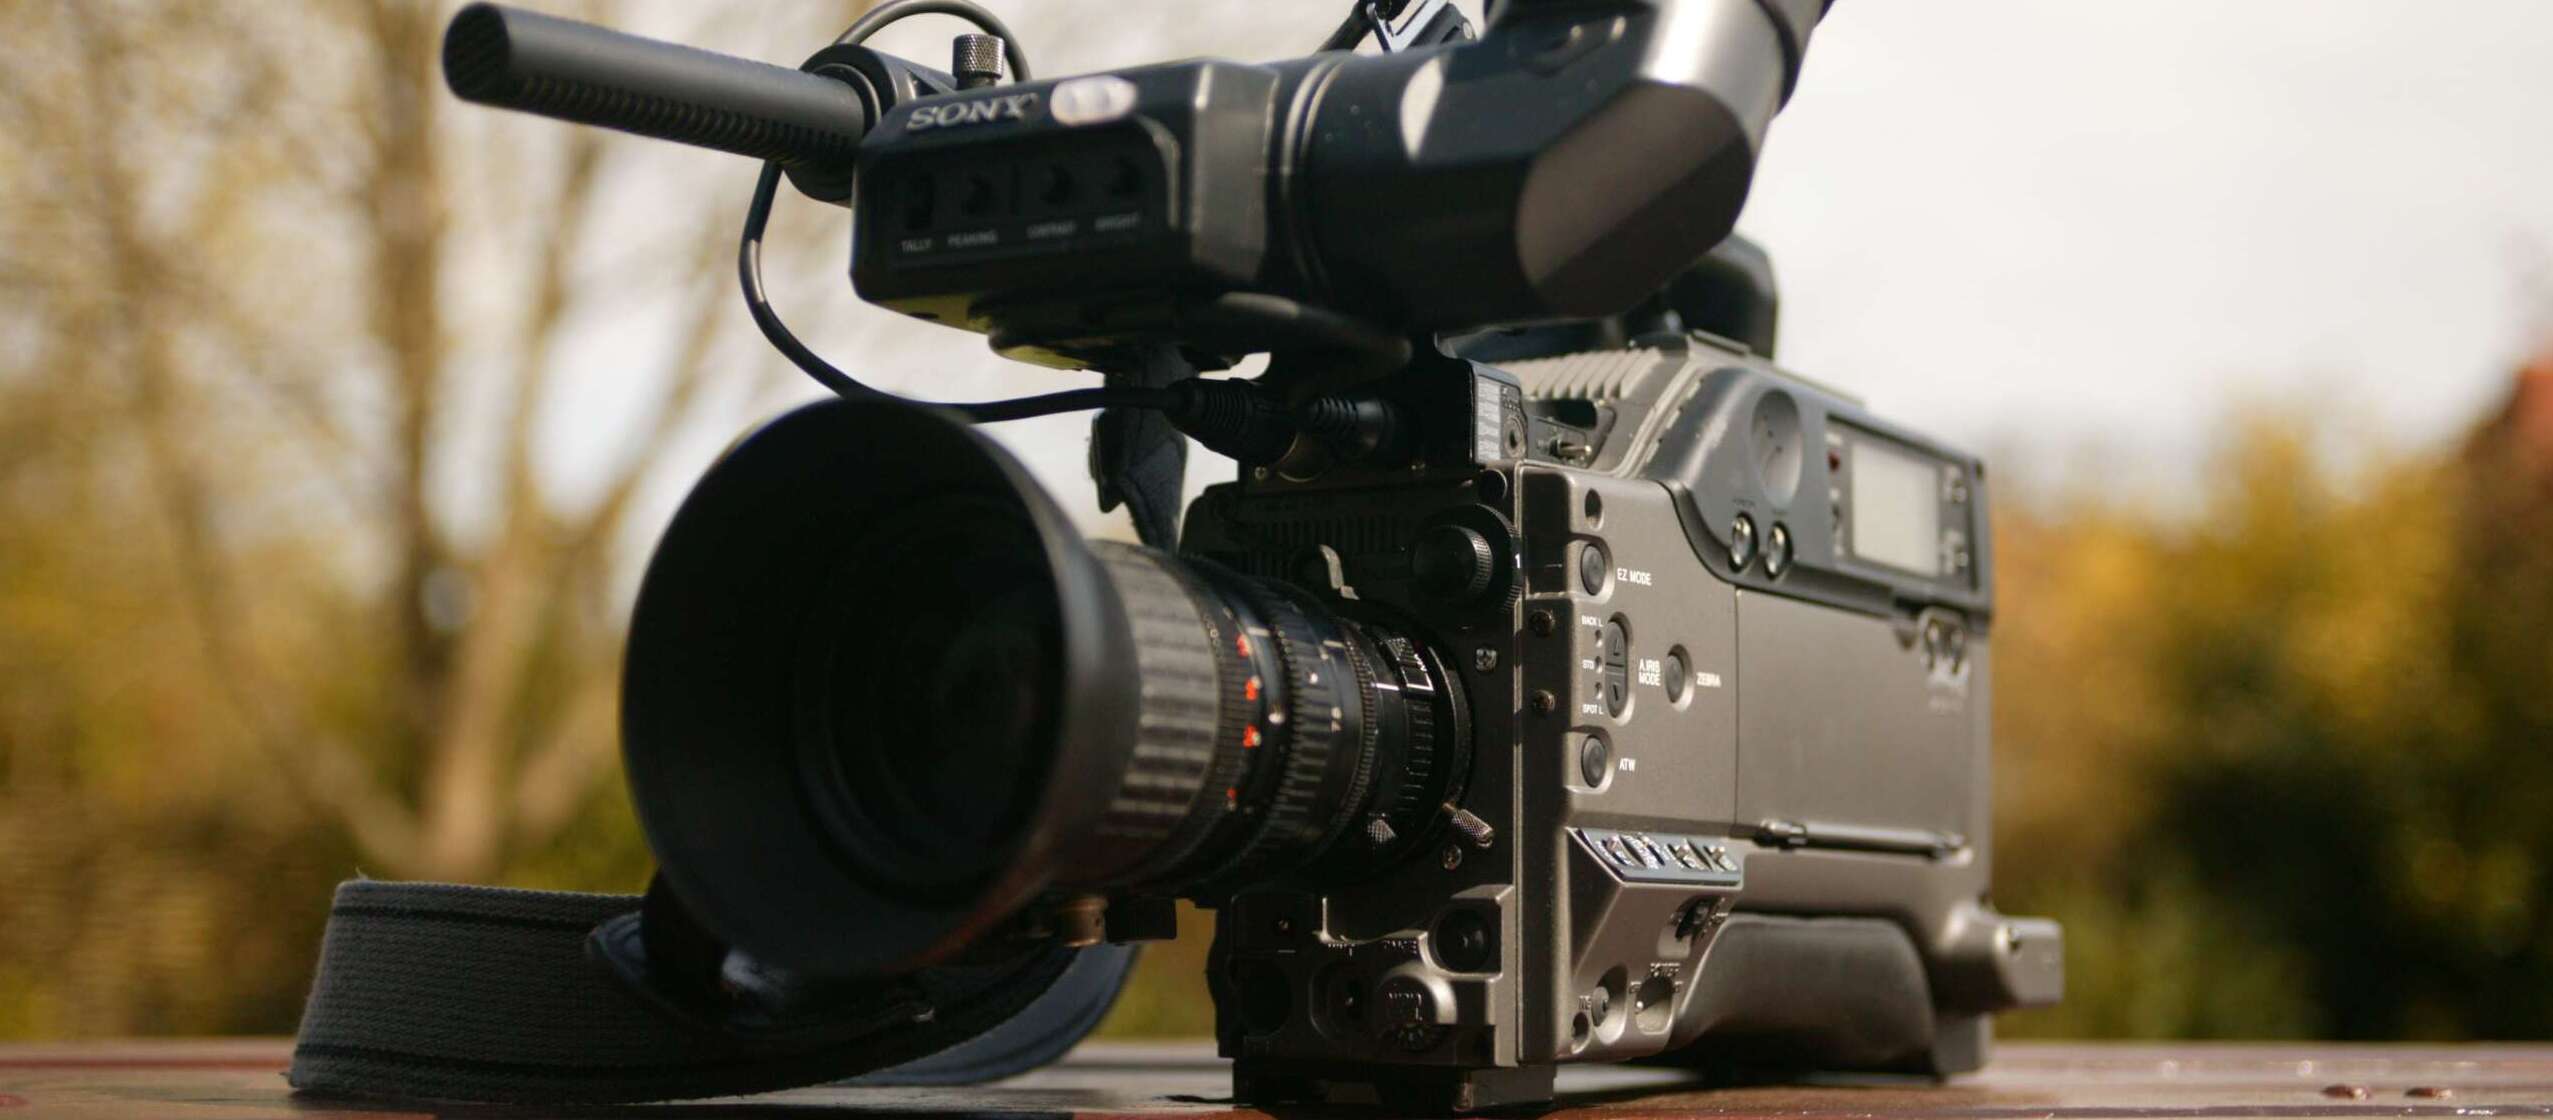 A television video camera sits on a table